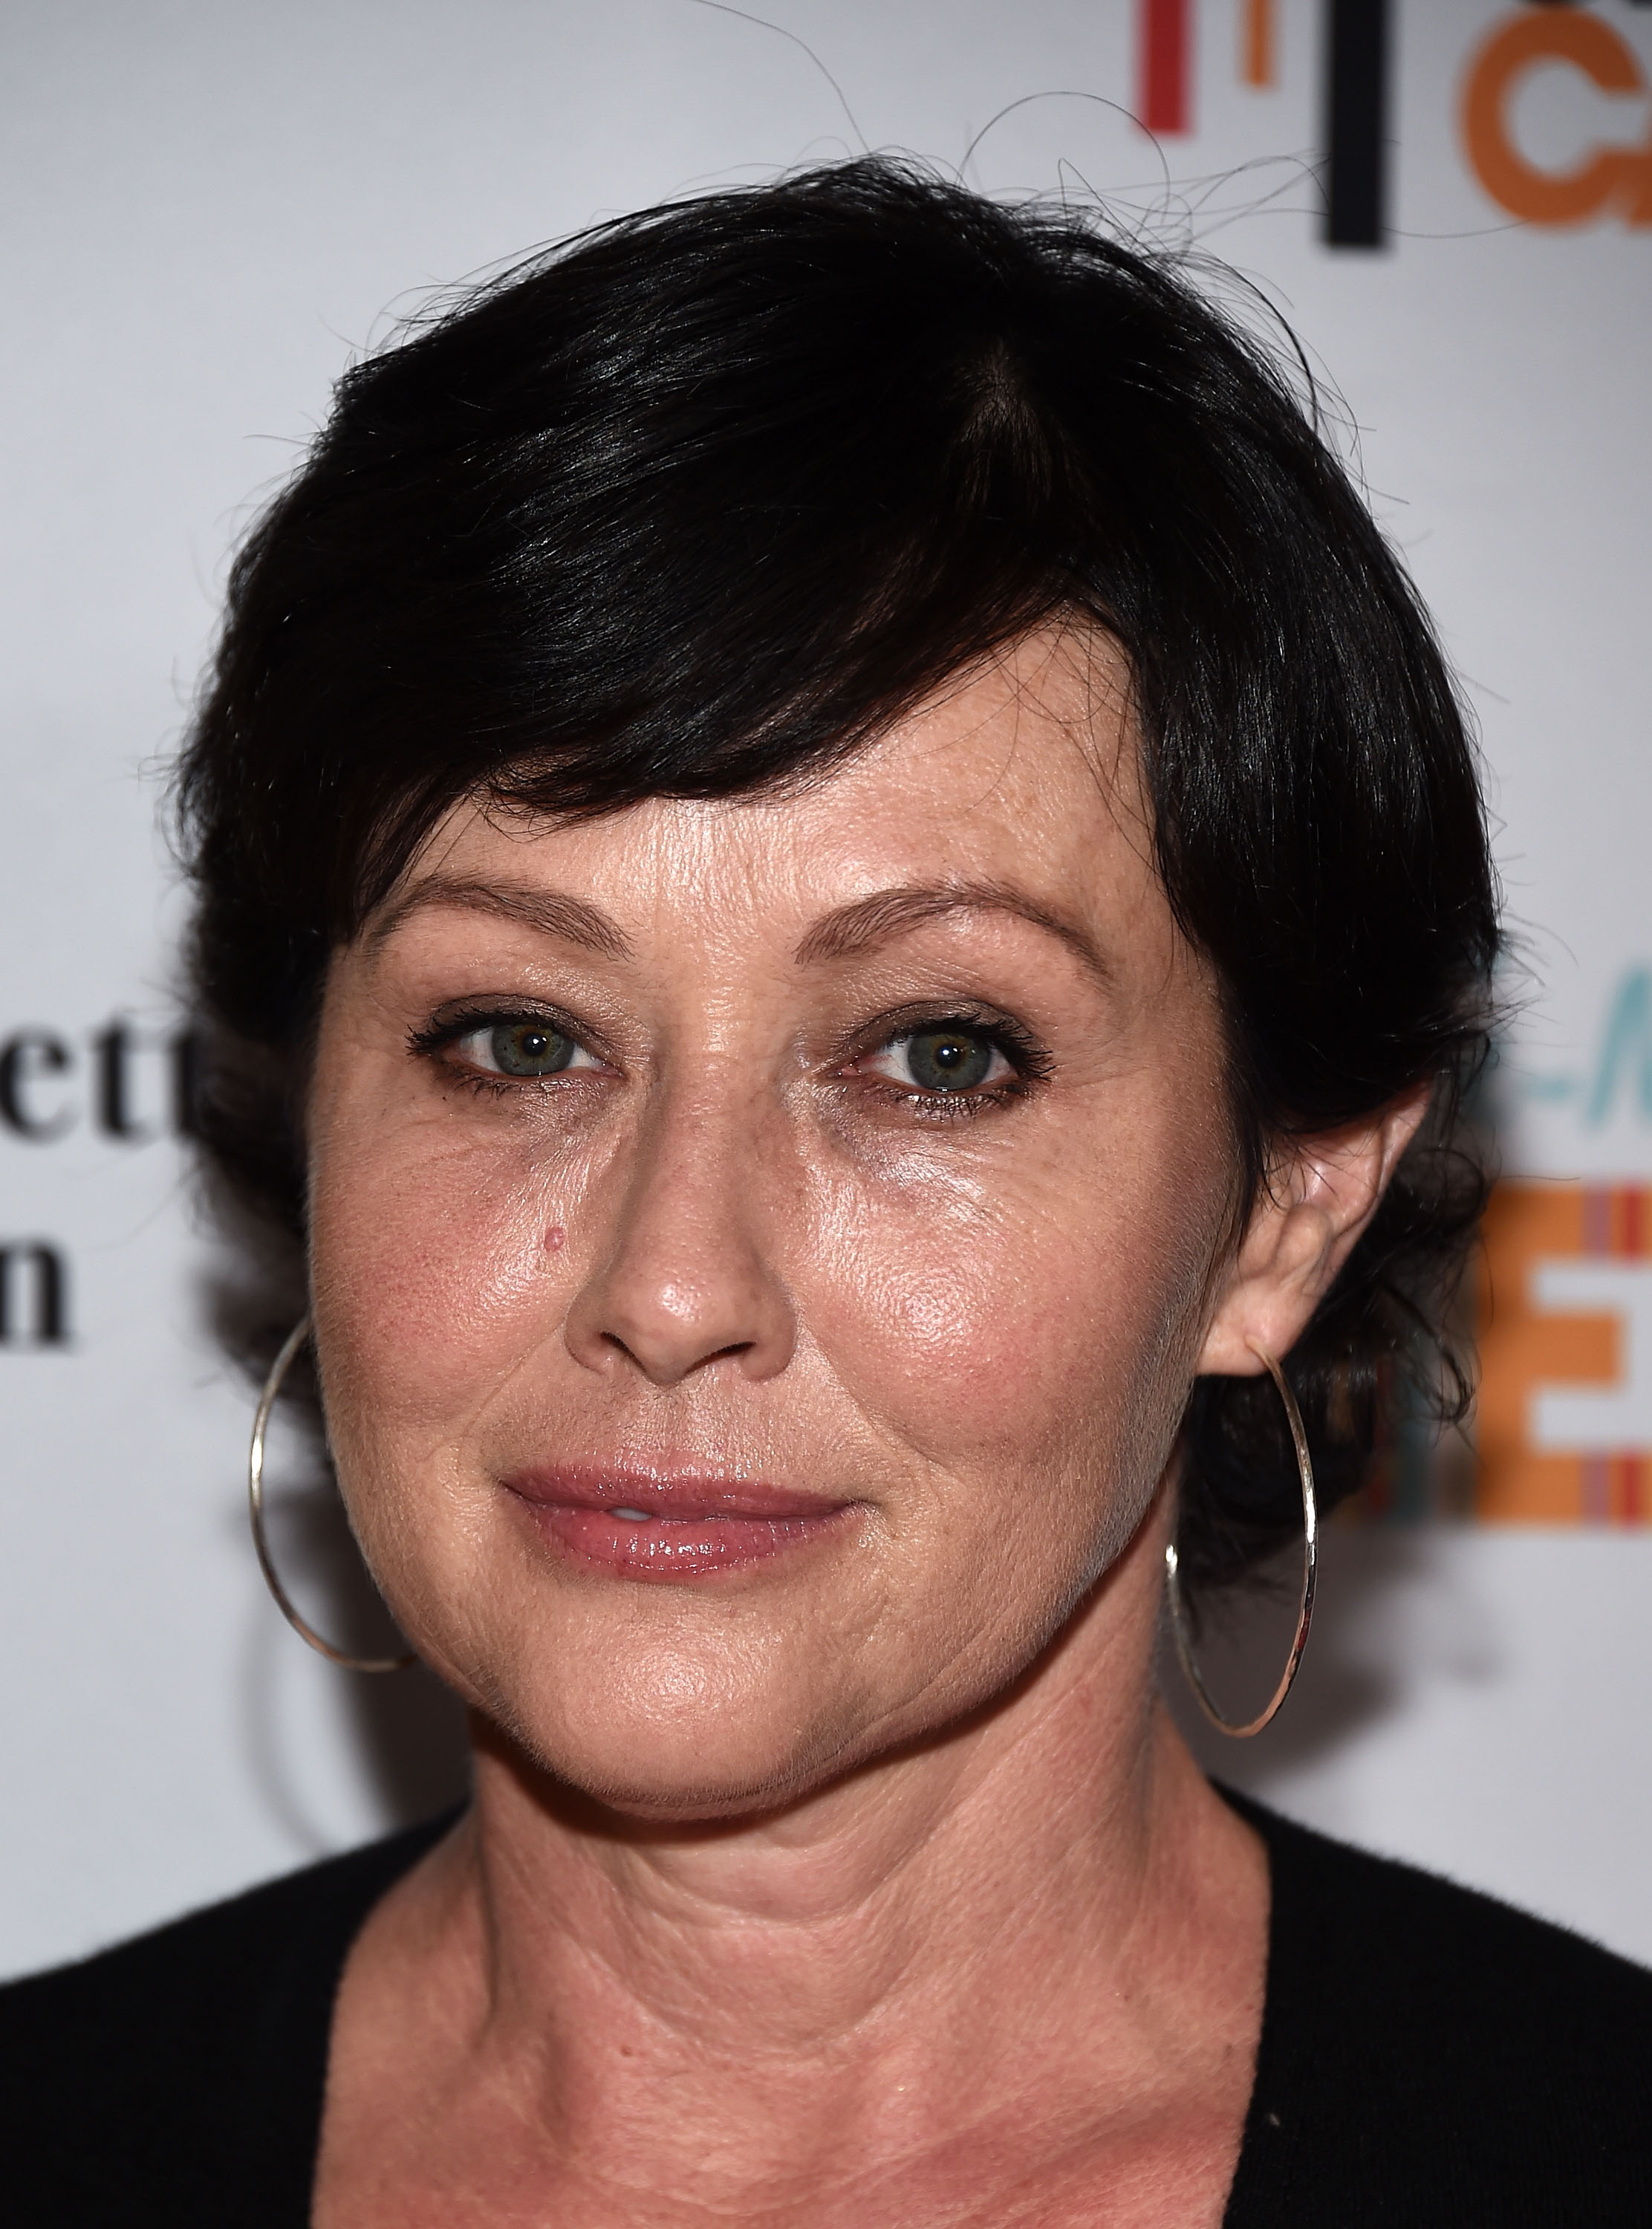 Shannen Doherty at the Farrah Fawcett Foundation's Tex-Mex Fiesta honoring Stand Up To Cancer event in Beverly Hills, California on September 9, 2017 | Source: Getty Images